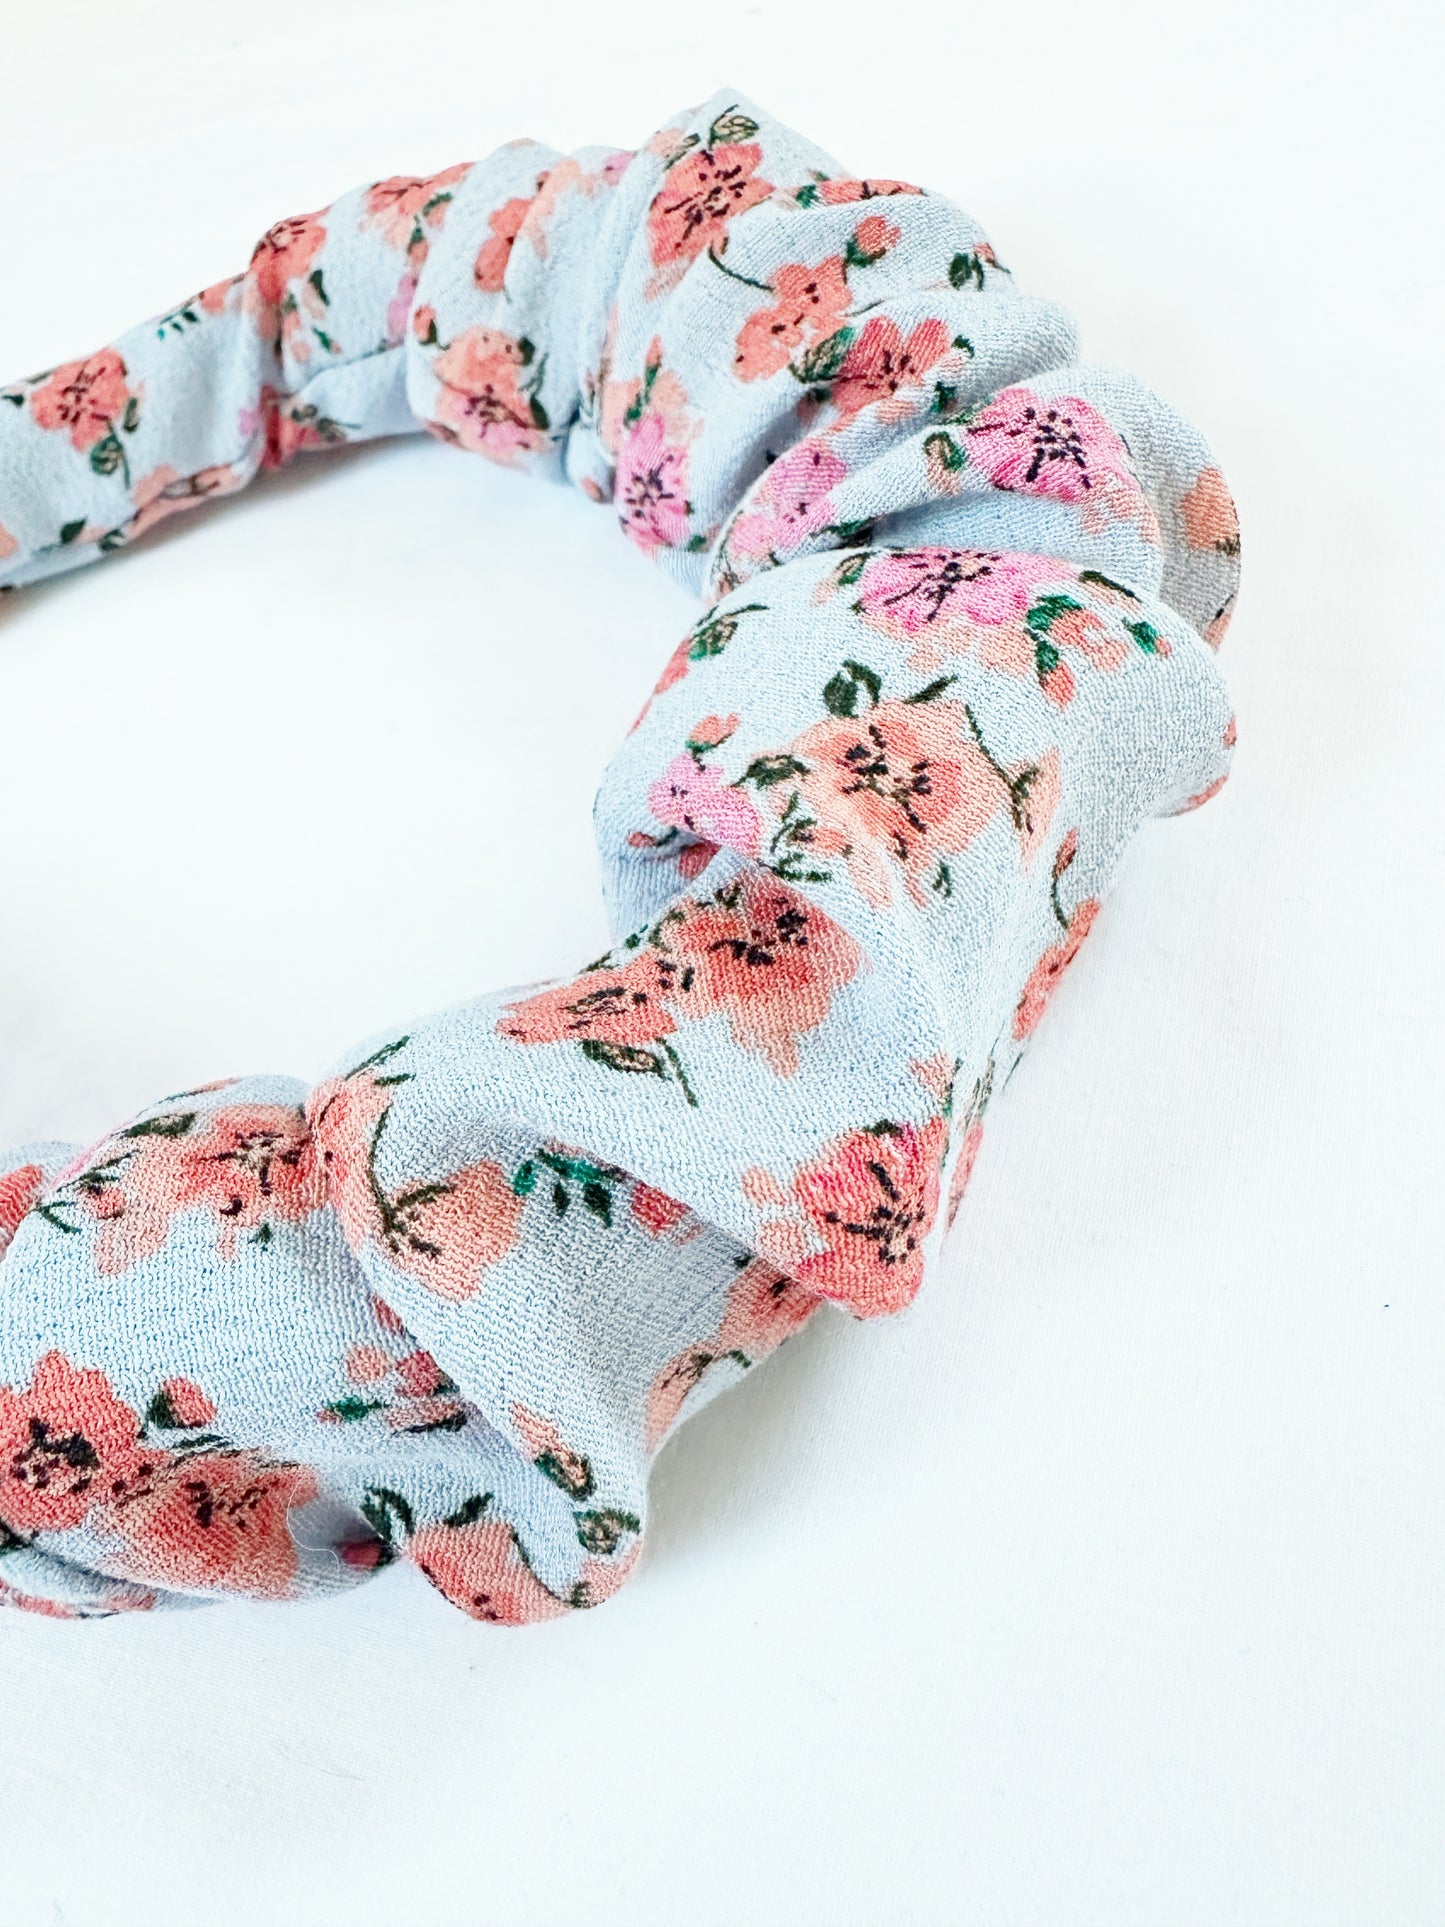 Ruffle Headband in blue pink floral